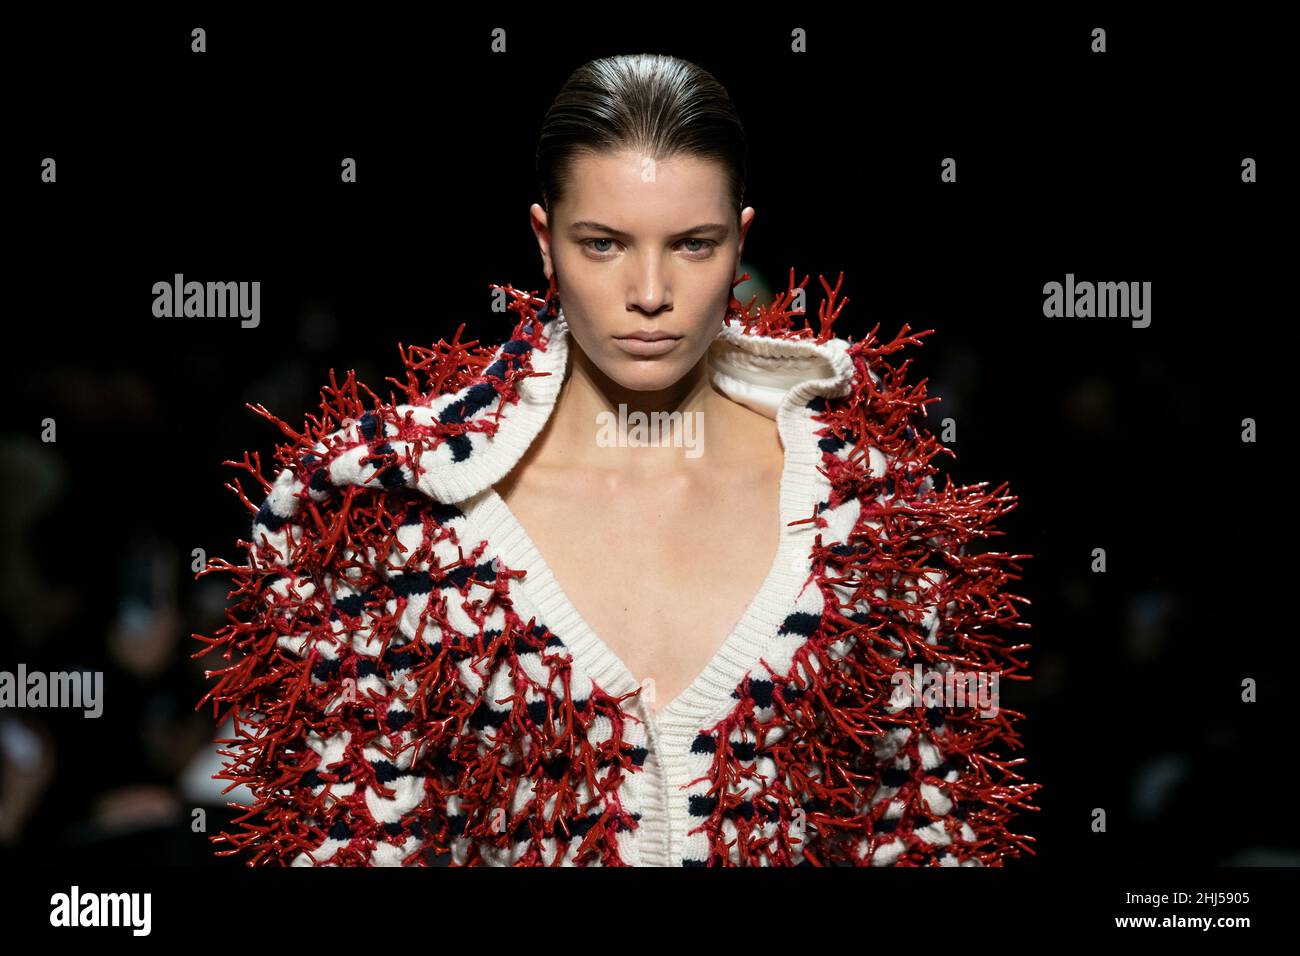 Paris, France. 26th Jan, 2022. JEAN PAUL GAULTIER Haute Couture SS22 Runway during Haute Couture Spring Summer 2022 - January 2022 - Paris, France 26/01/2022 Credit: dpa/Alamy Live News Stock Photo